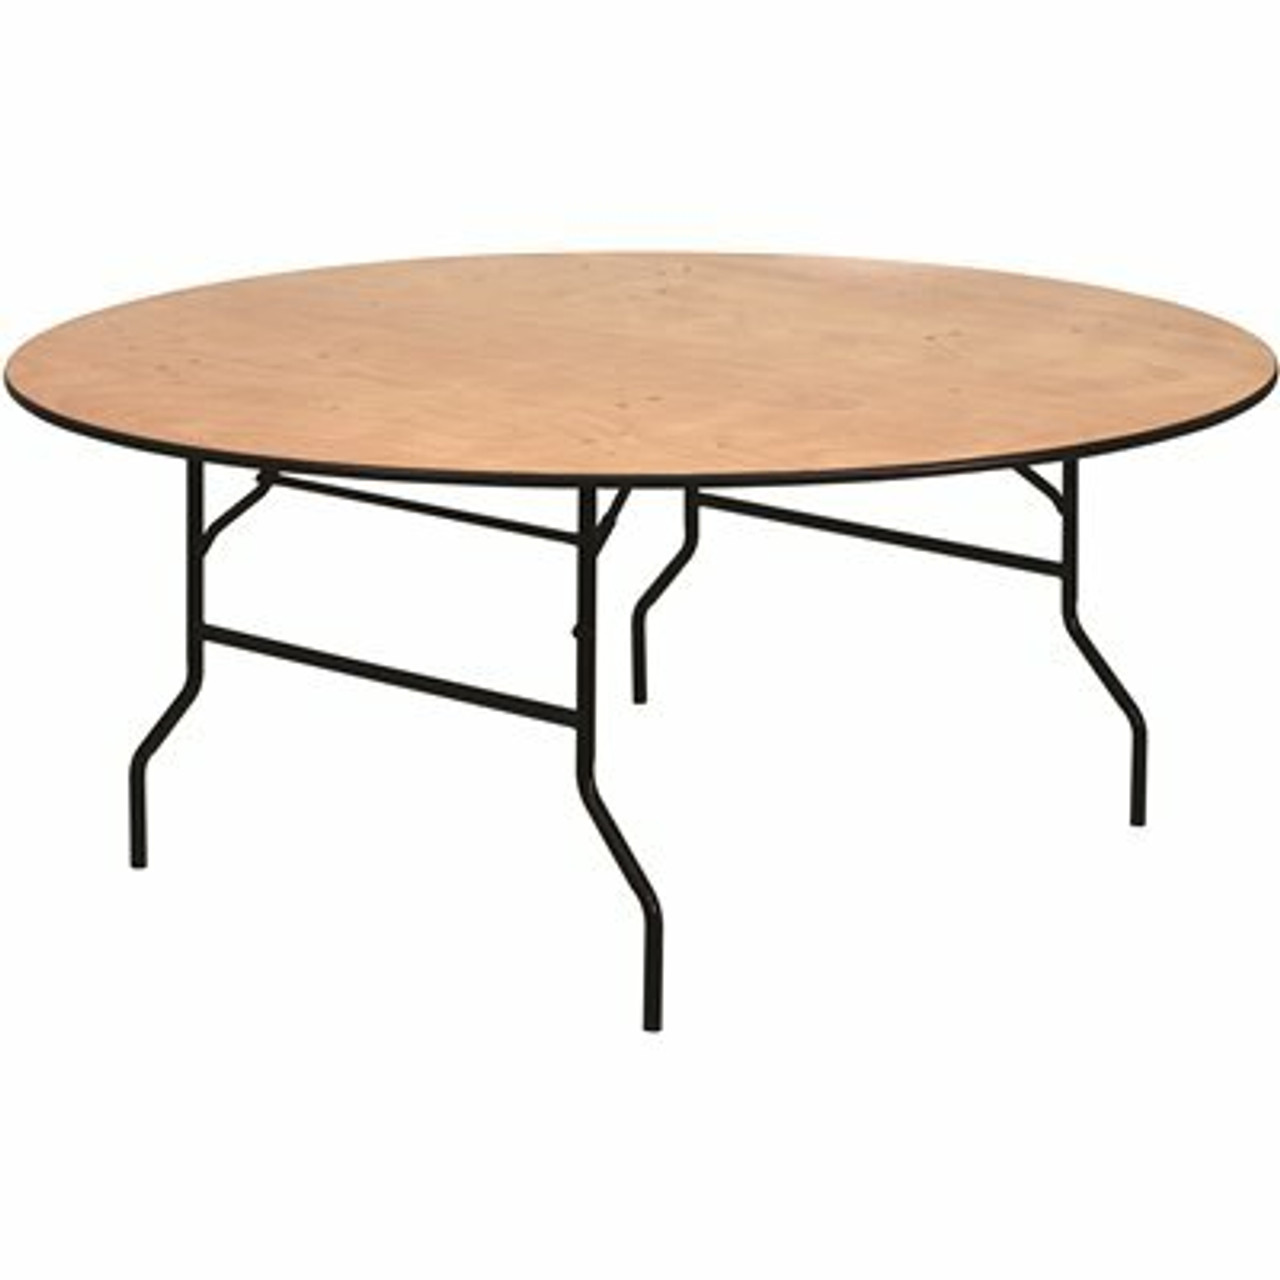 72 In. Natural Wood Tabletop Metal Frame Folding Table - 308688199